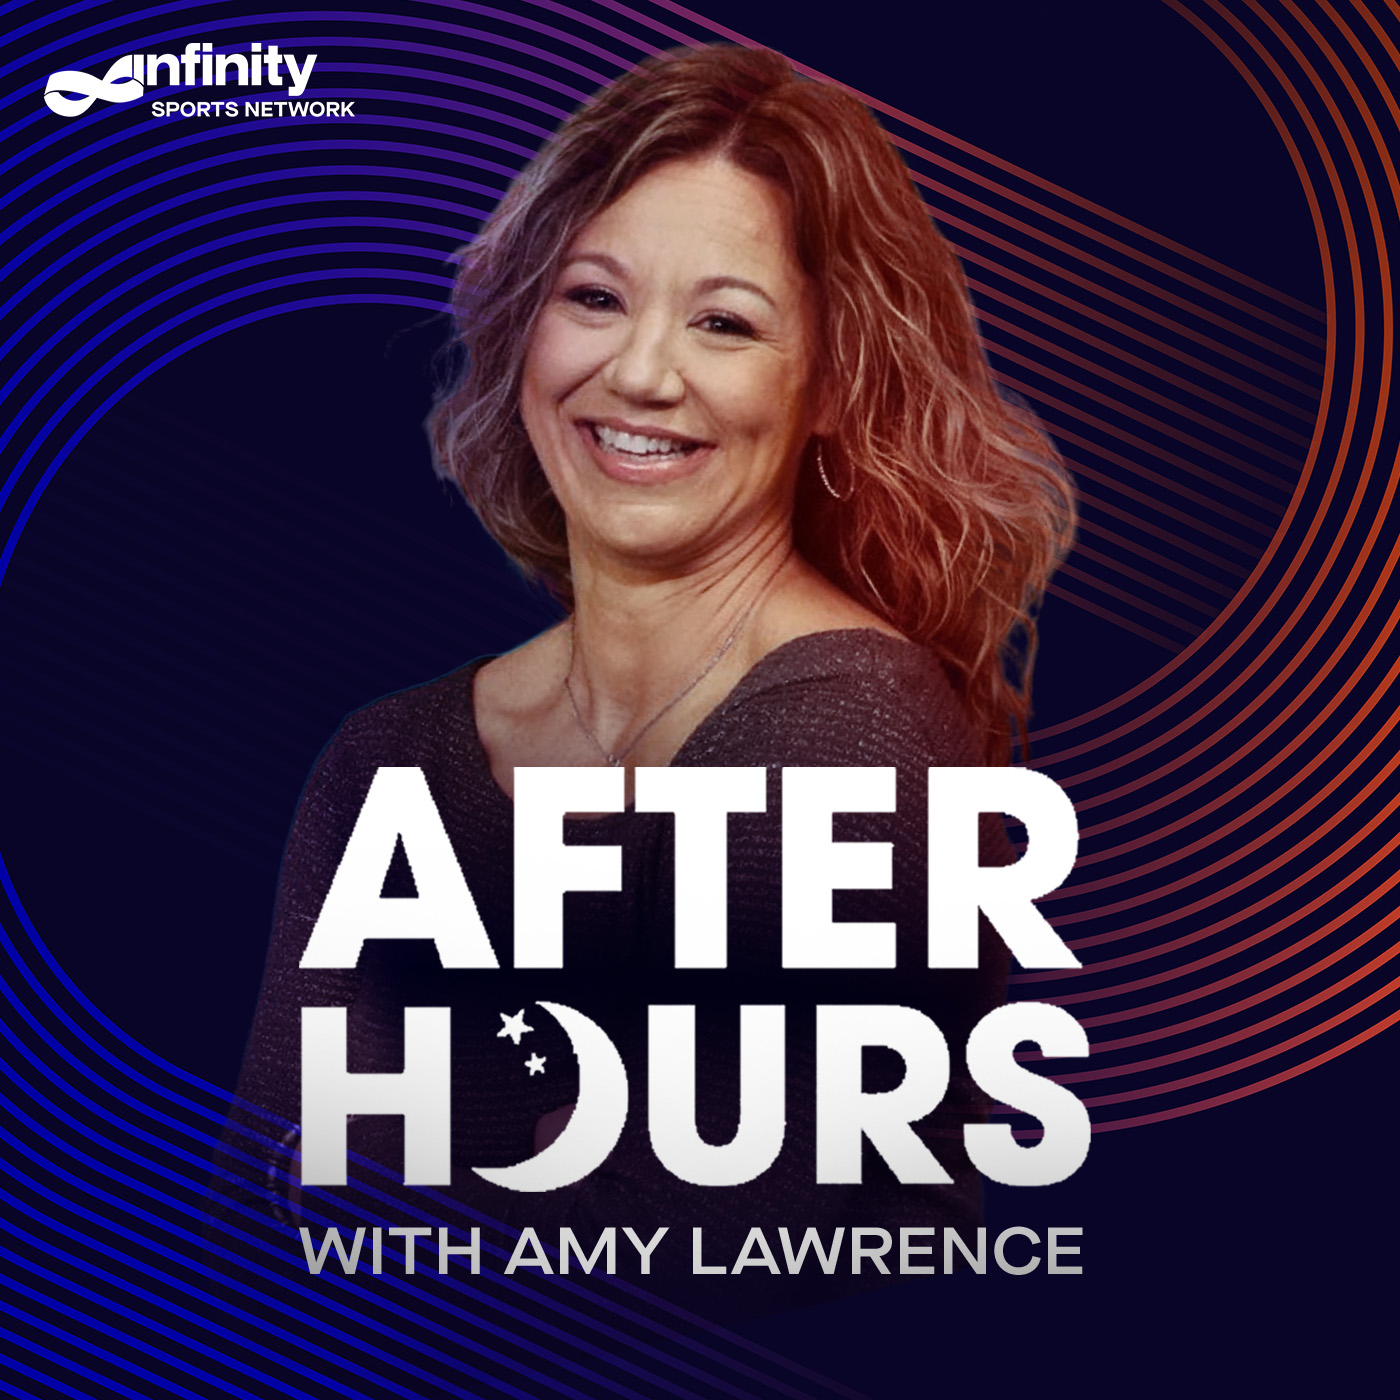 1-6-22 After Hours with Amy Lawrence PODCAST: Hour 1